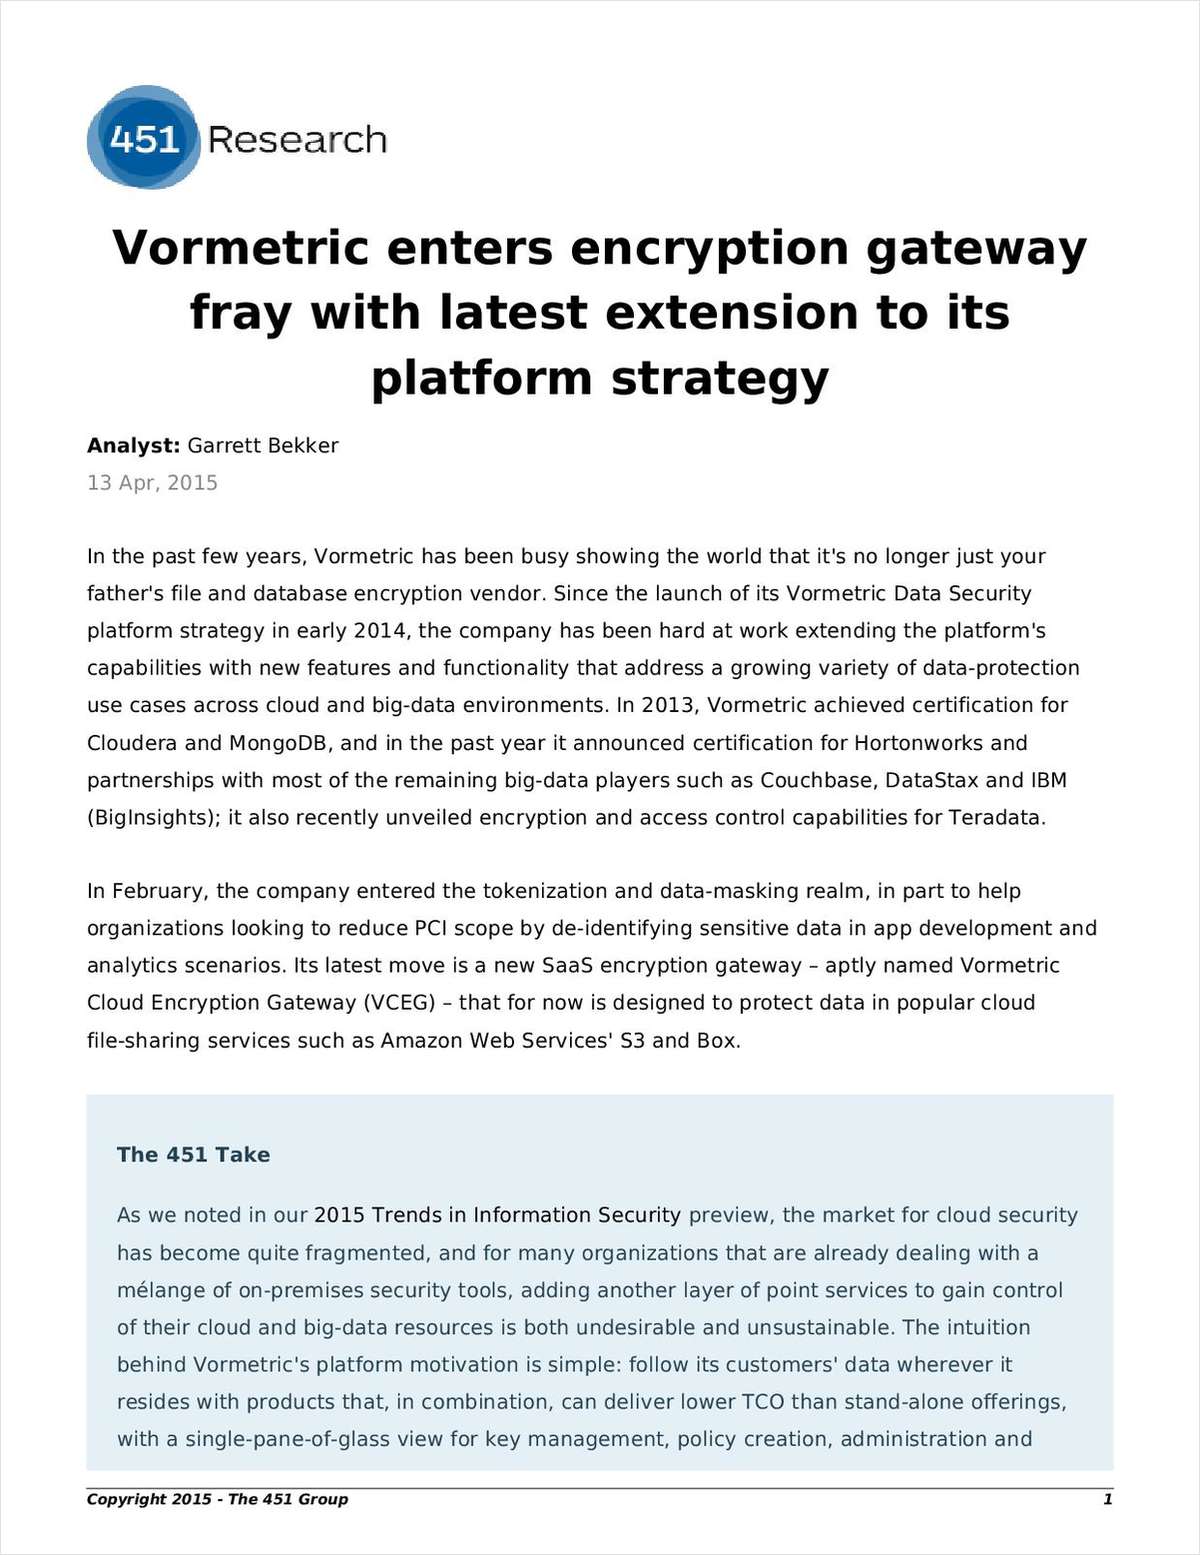 451 Research: Vormetric Enters Encryption Gateway Fray with Latest Extension to Its Platform Strategy